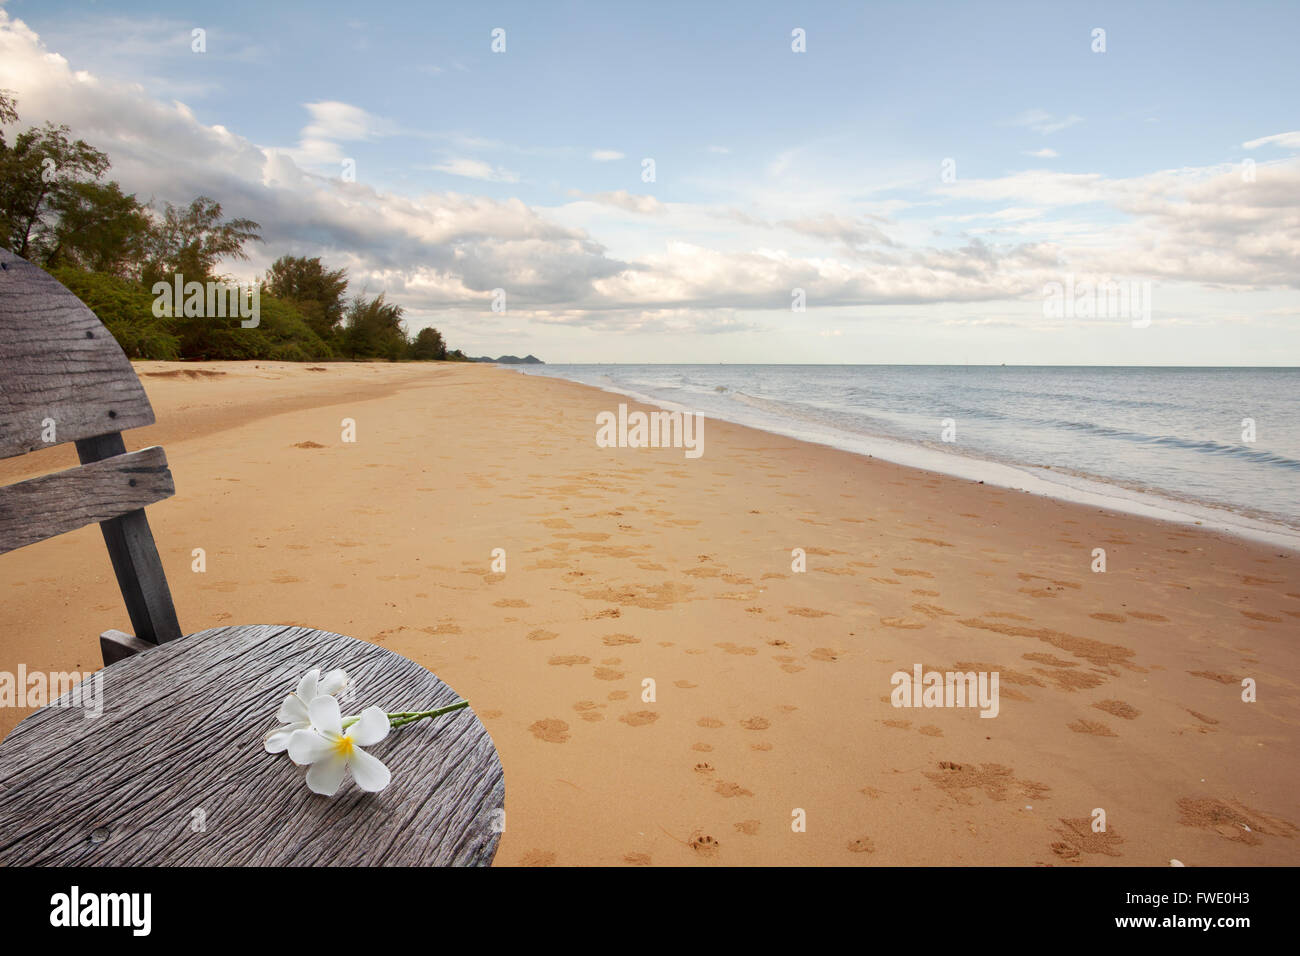 frangipani flowers on old wooden chair on sand beach Stock Photo